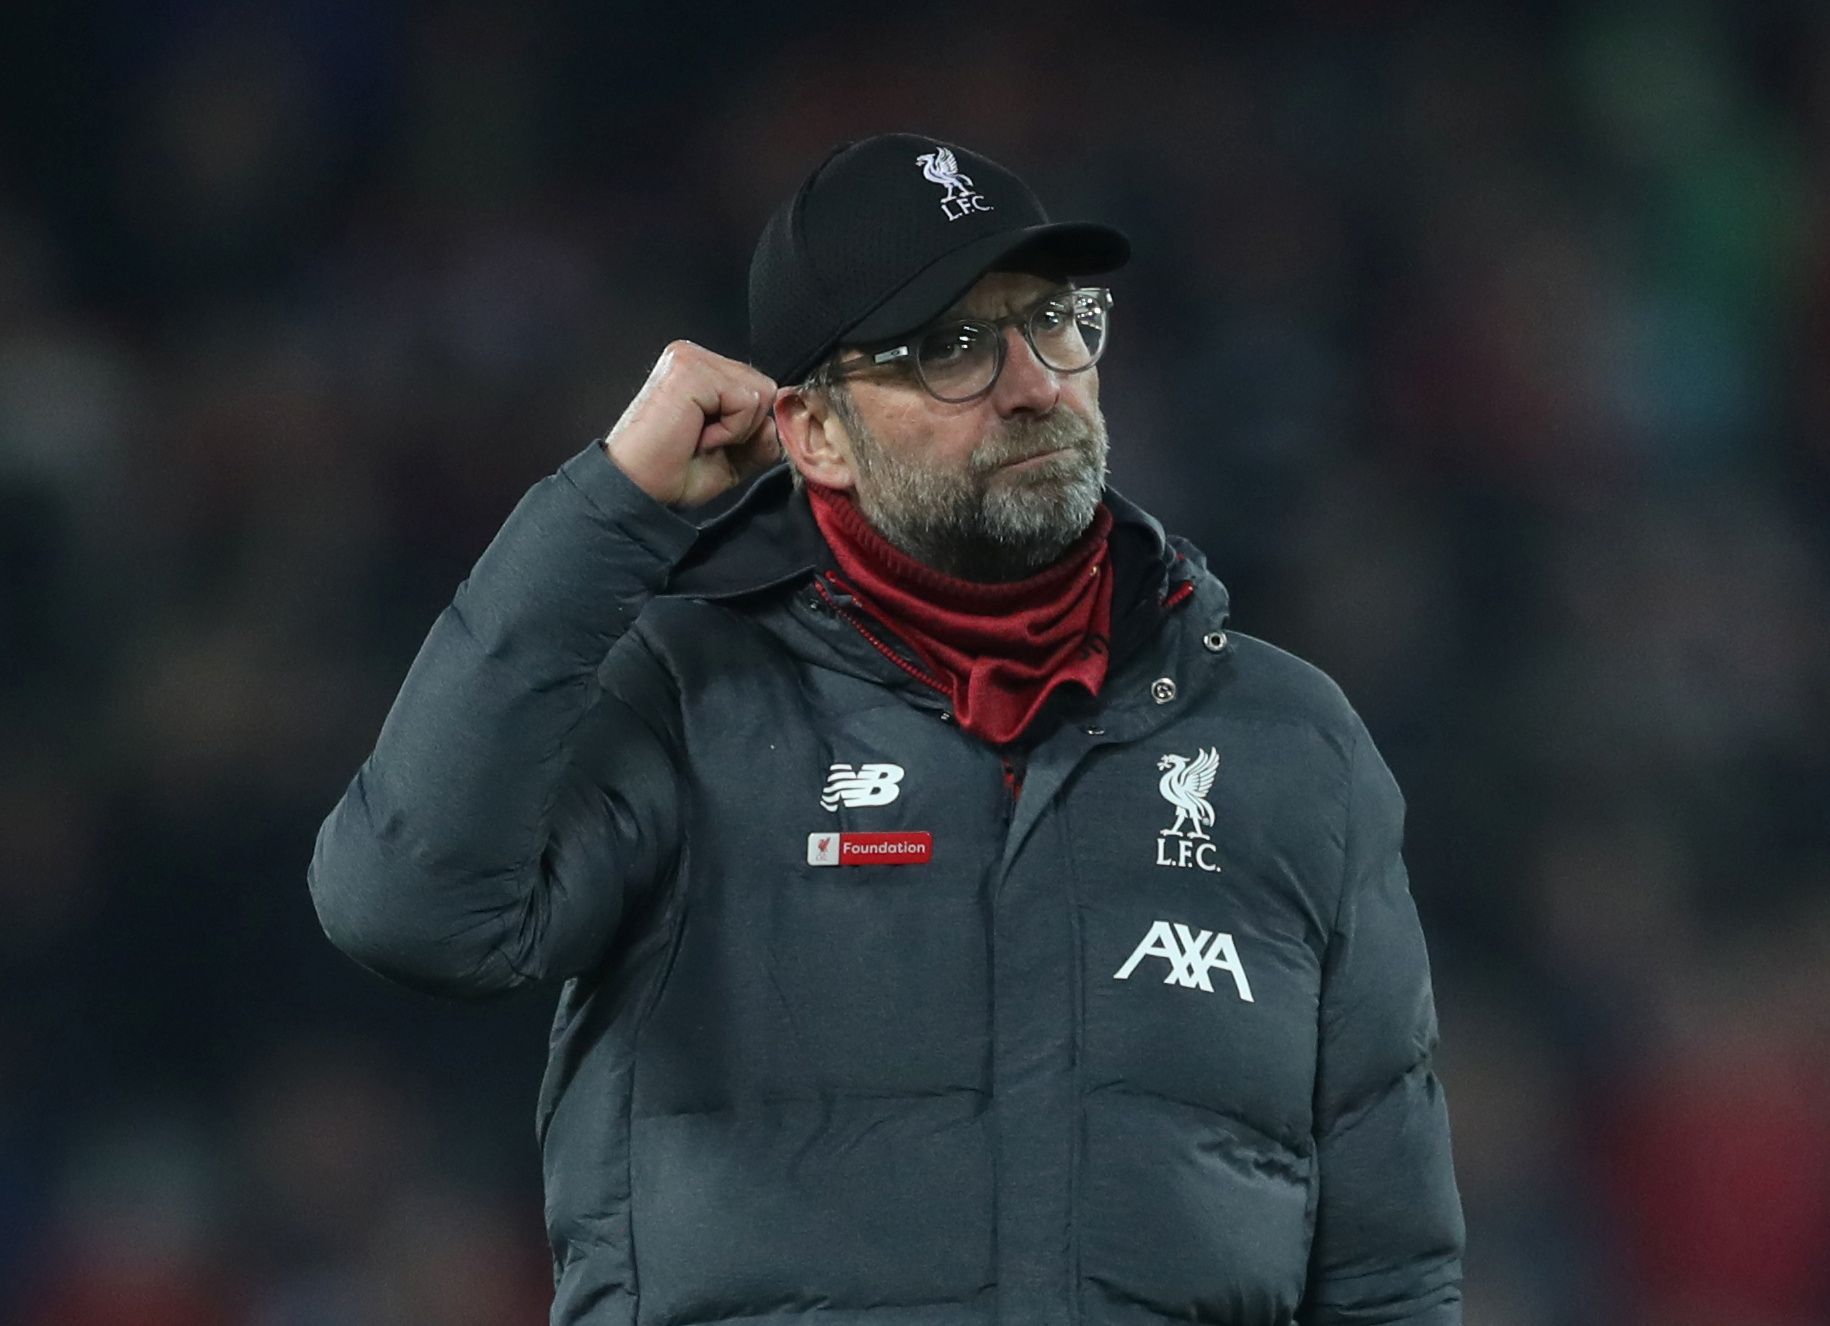 Soccer Football - Premier League - Liverpool v Wolverhampton Wanderers - Anfield, Liverpool, Britain - December 29, 2019   Liverpool manager Juergen Klopp celebrates after the match   Action Images via Reuters/Carl Recine    EDITORIAL USE ONLY. No use with unauthorized audio, video, data, fixture lists, club/league logos or 